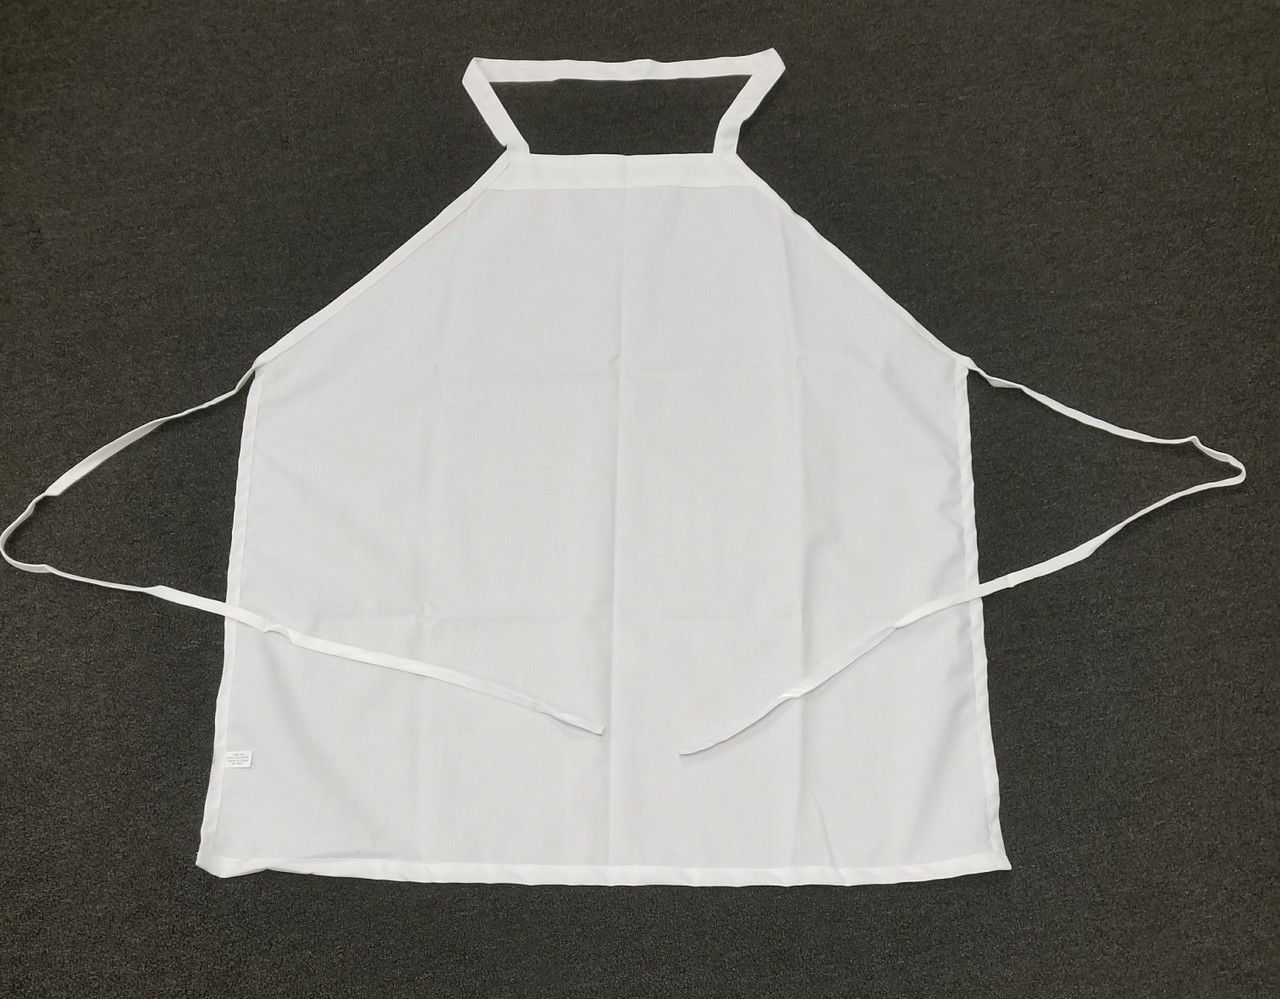 Bib Aprons No Pockets by Intralin Questions & Answers